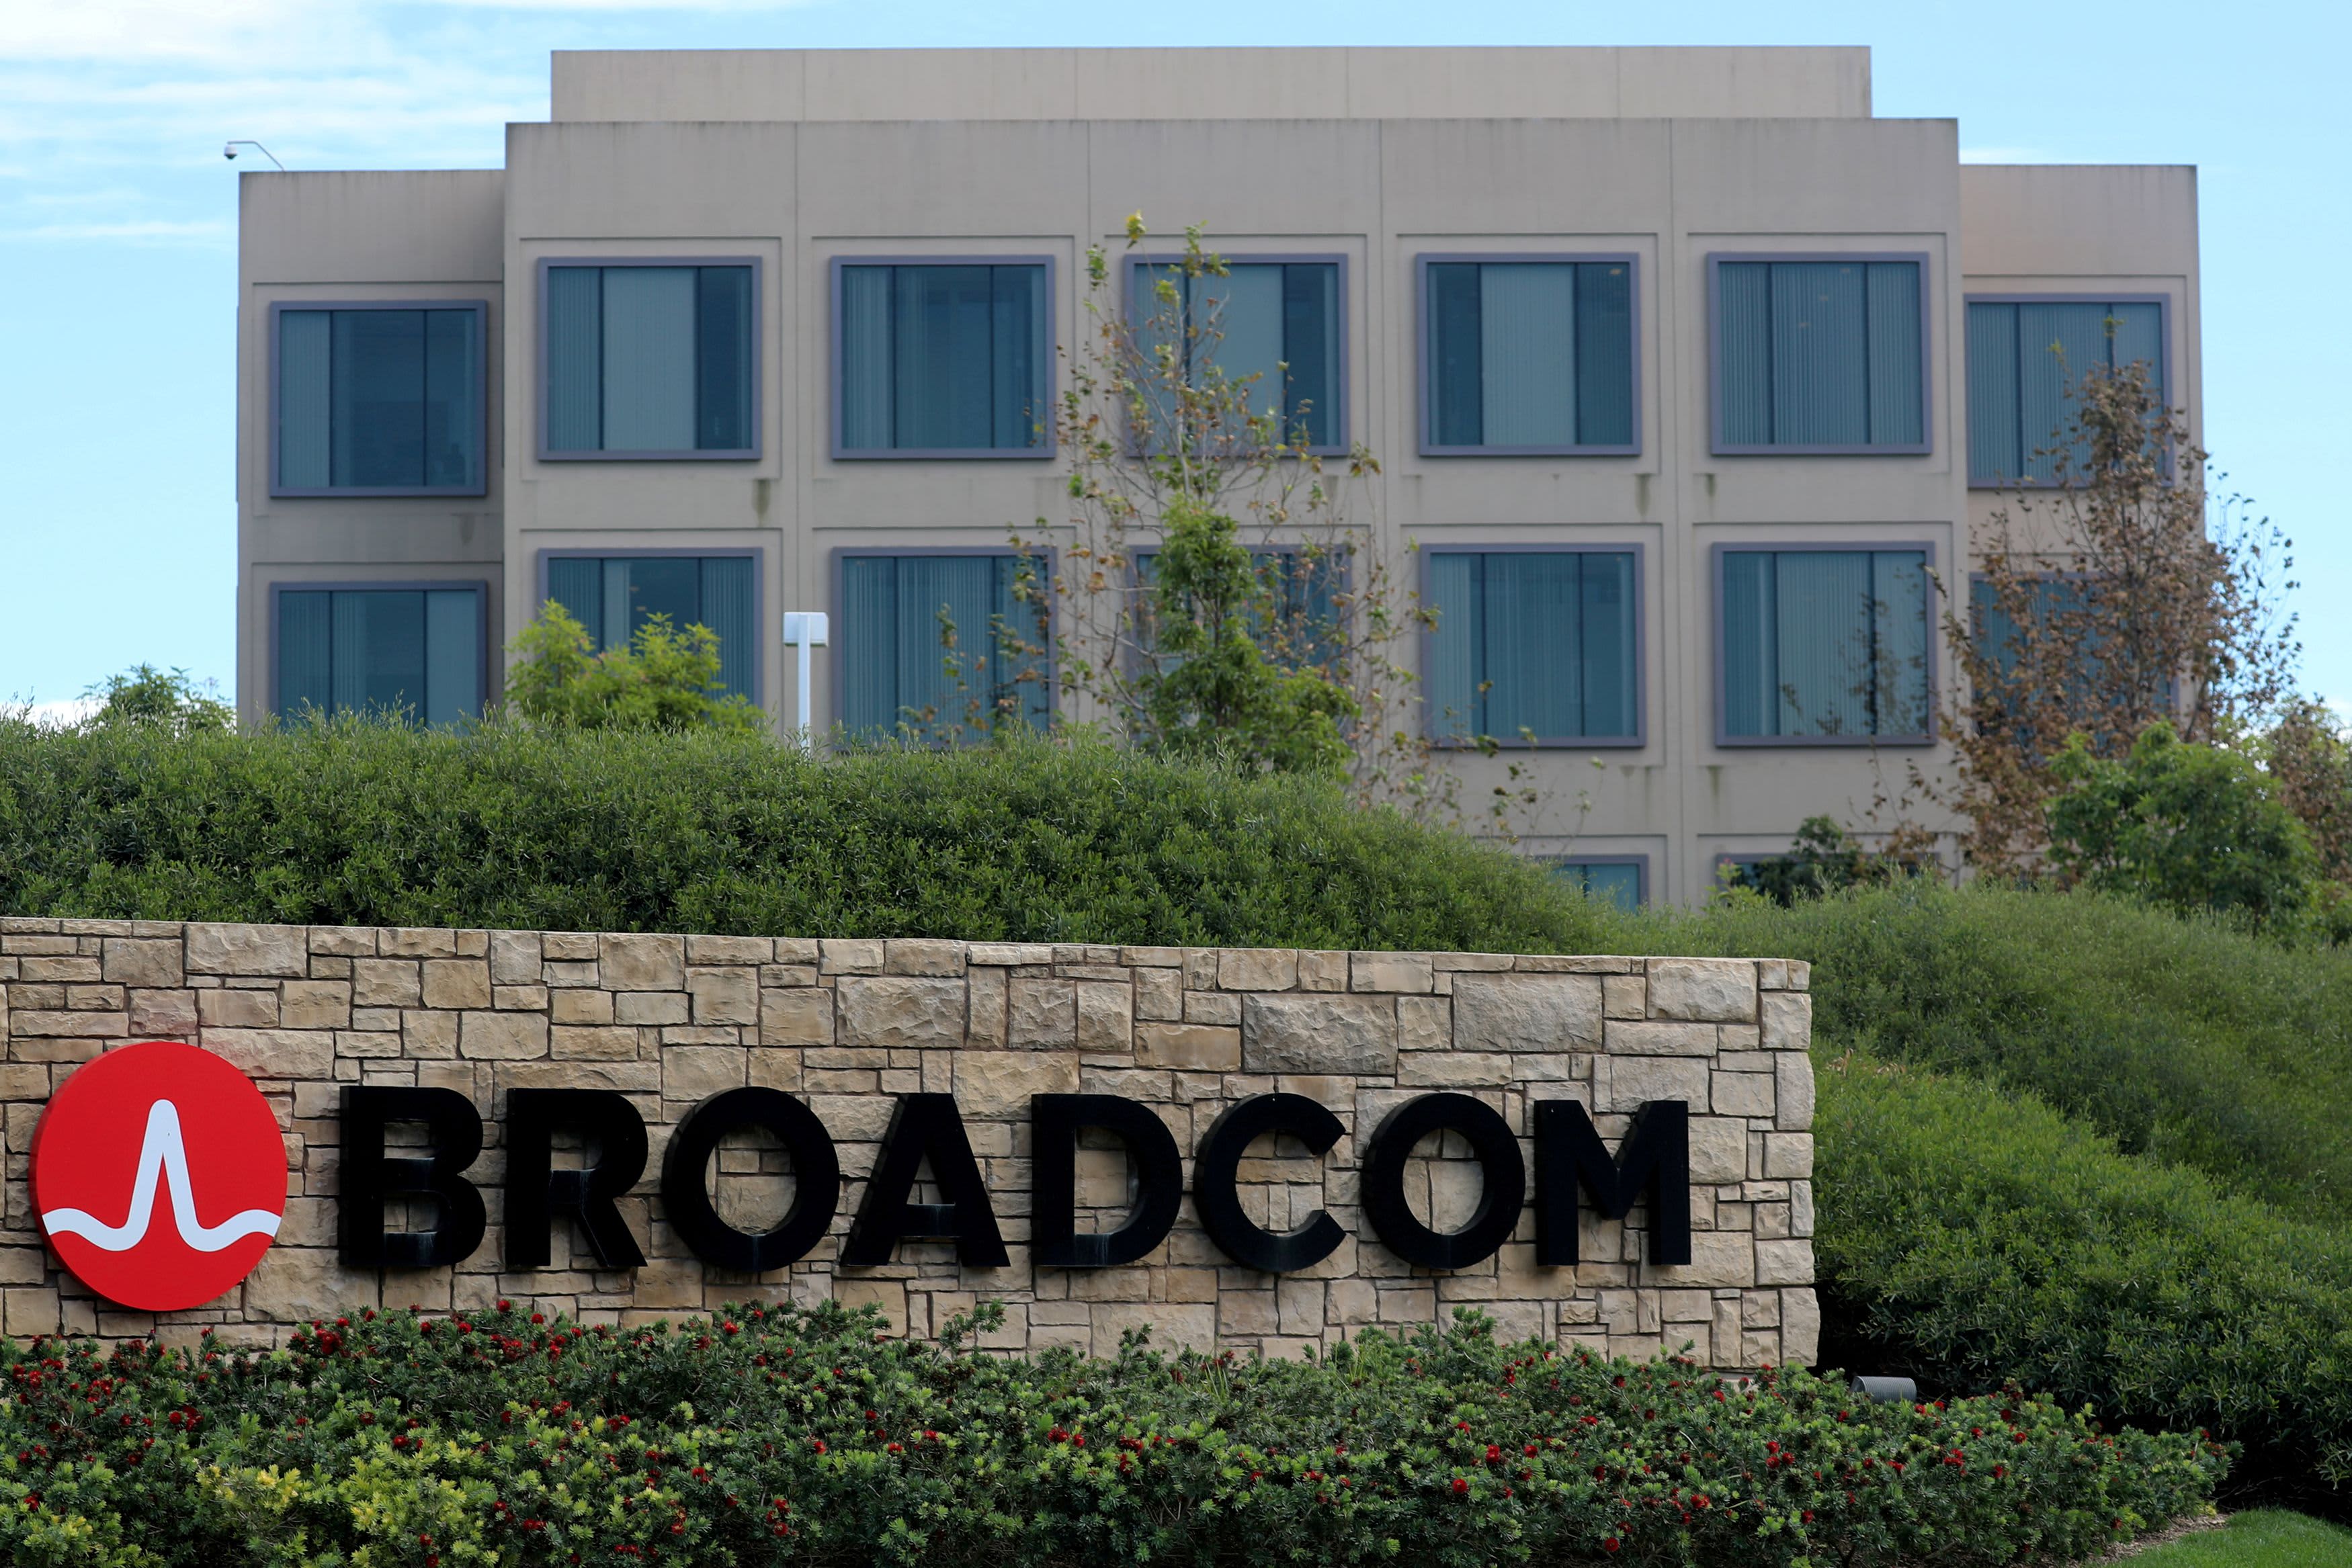 Broadcom is a 'best-in-class' chip stock as A.I. drives earnings power, Bank of America says